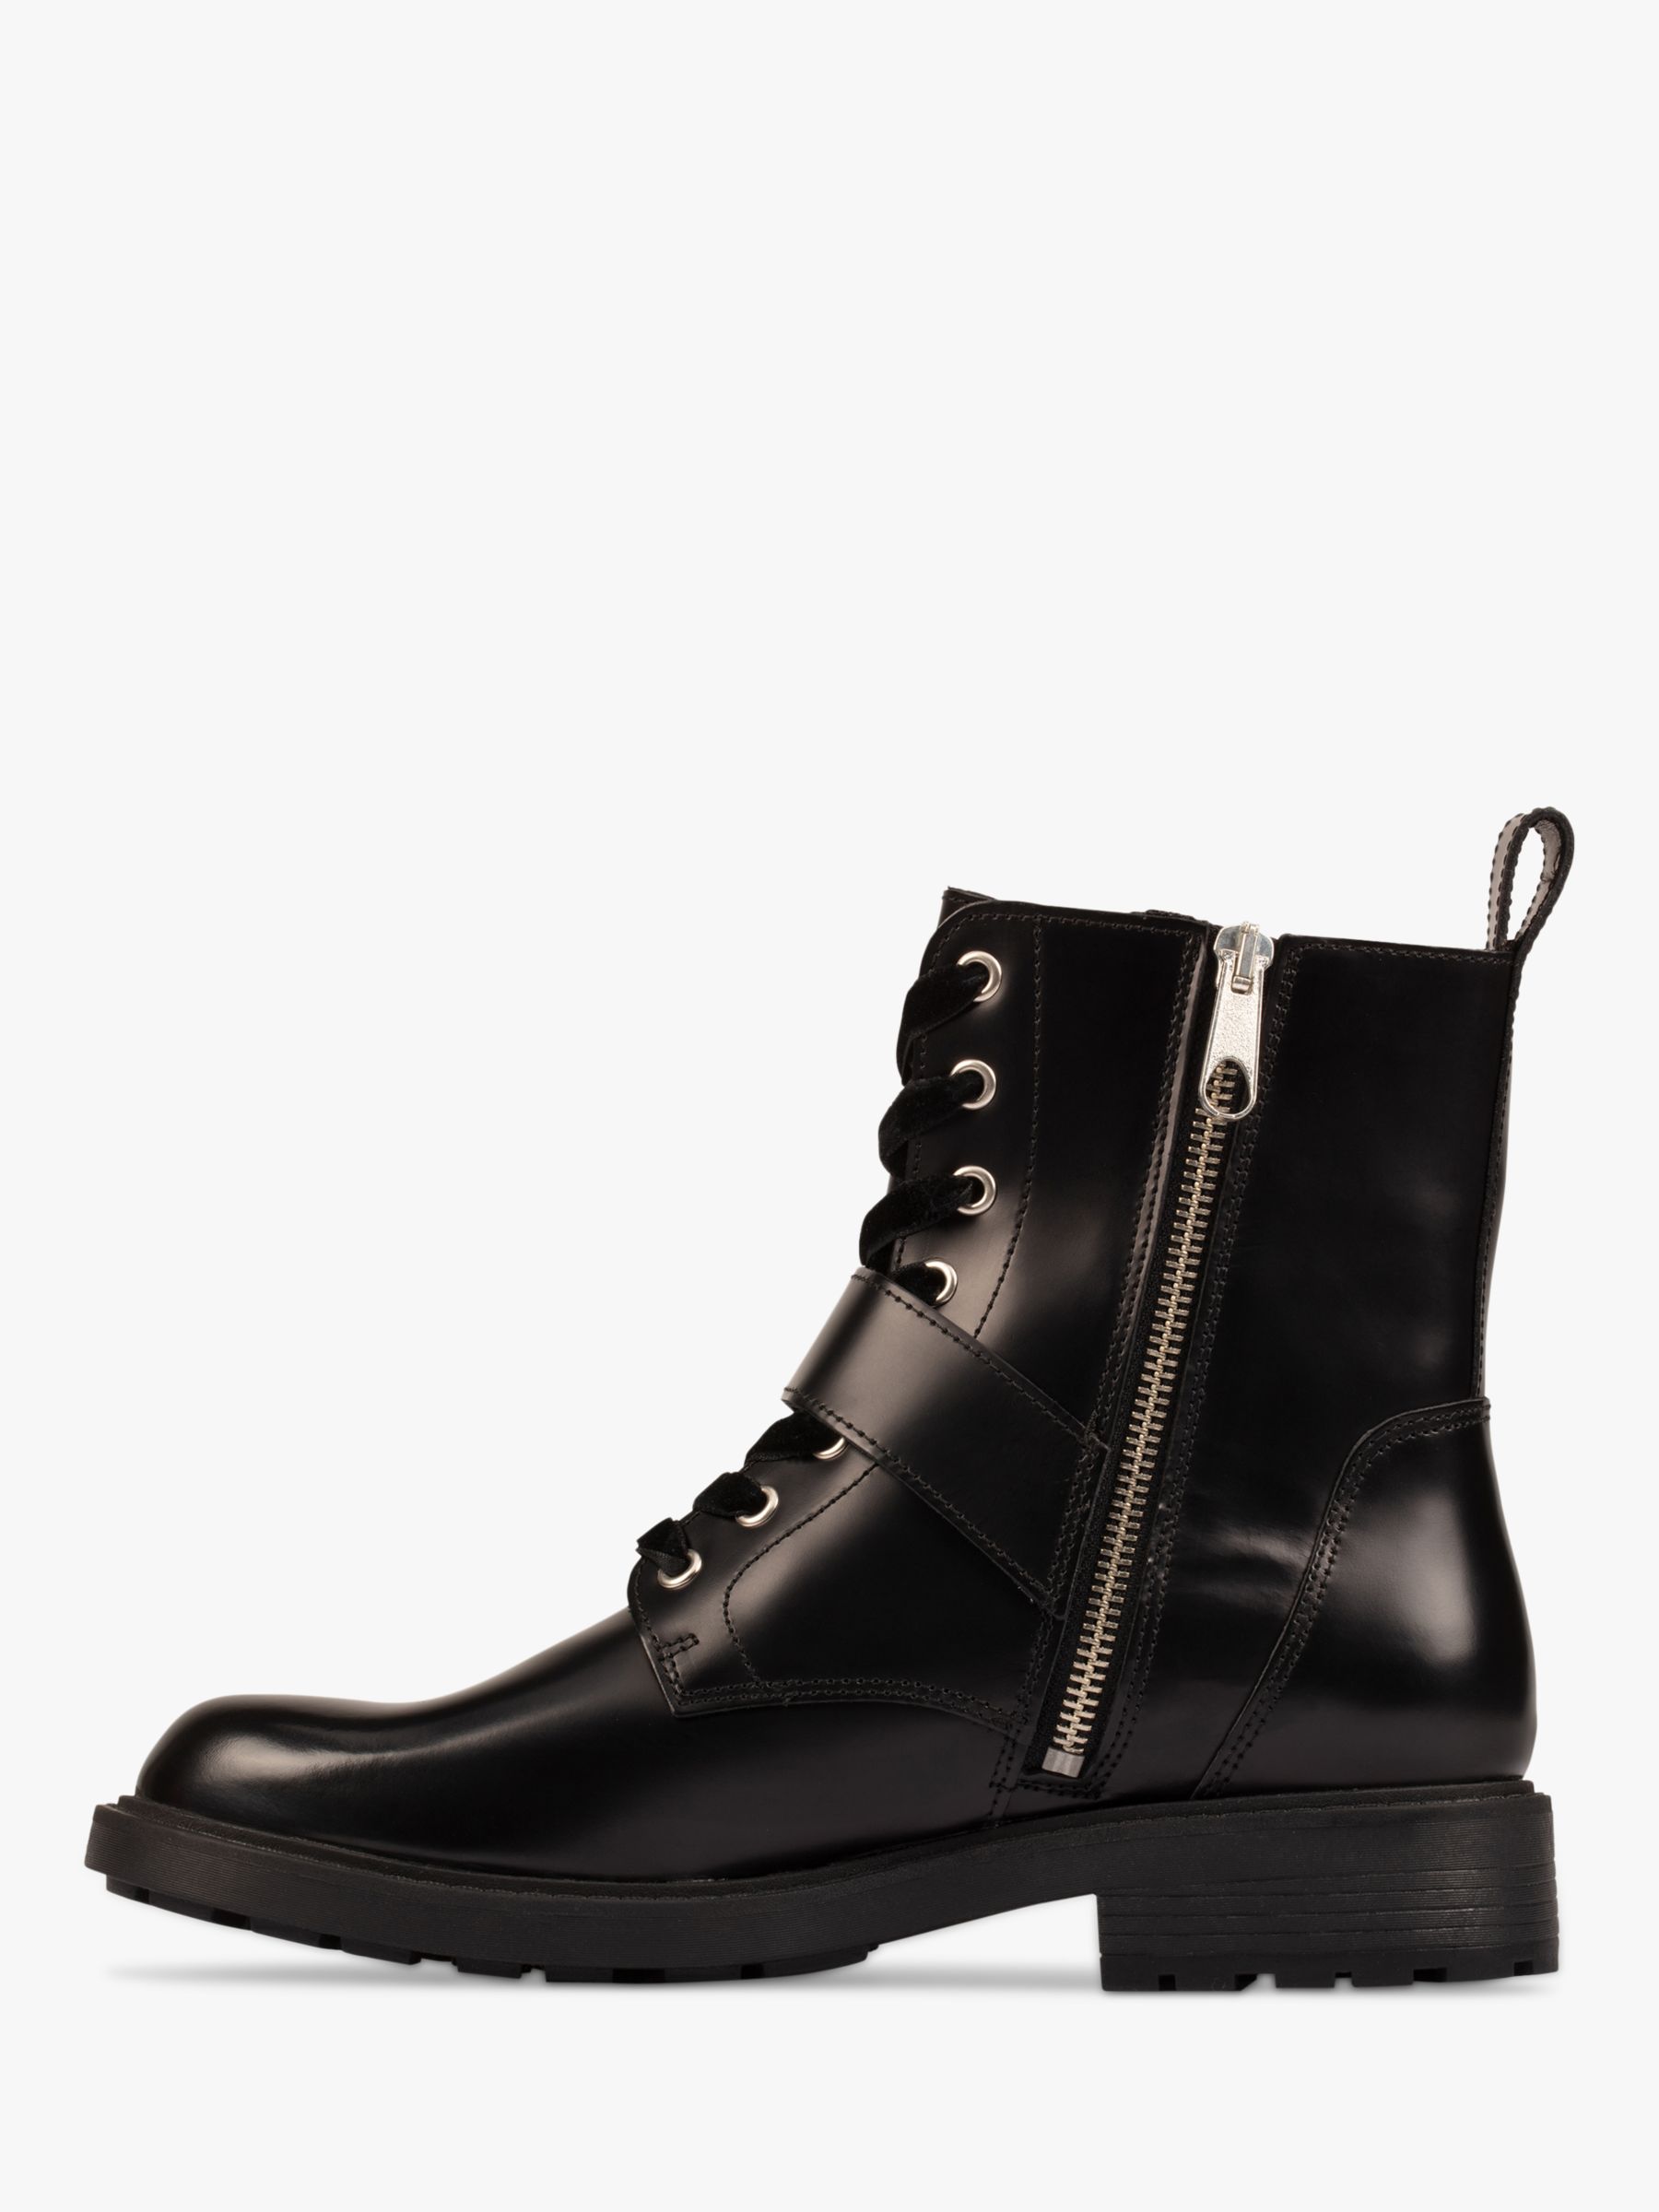 Clarks Orinoco 2 Leather Buckle Ankle Boots, Black at John Lewis & Partners